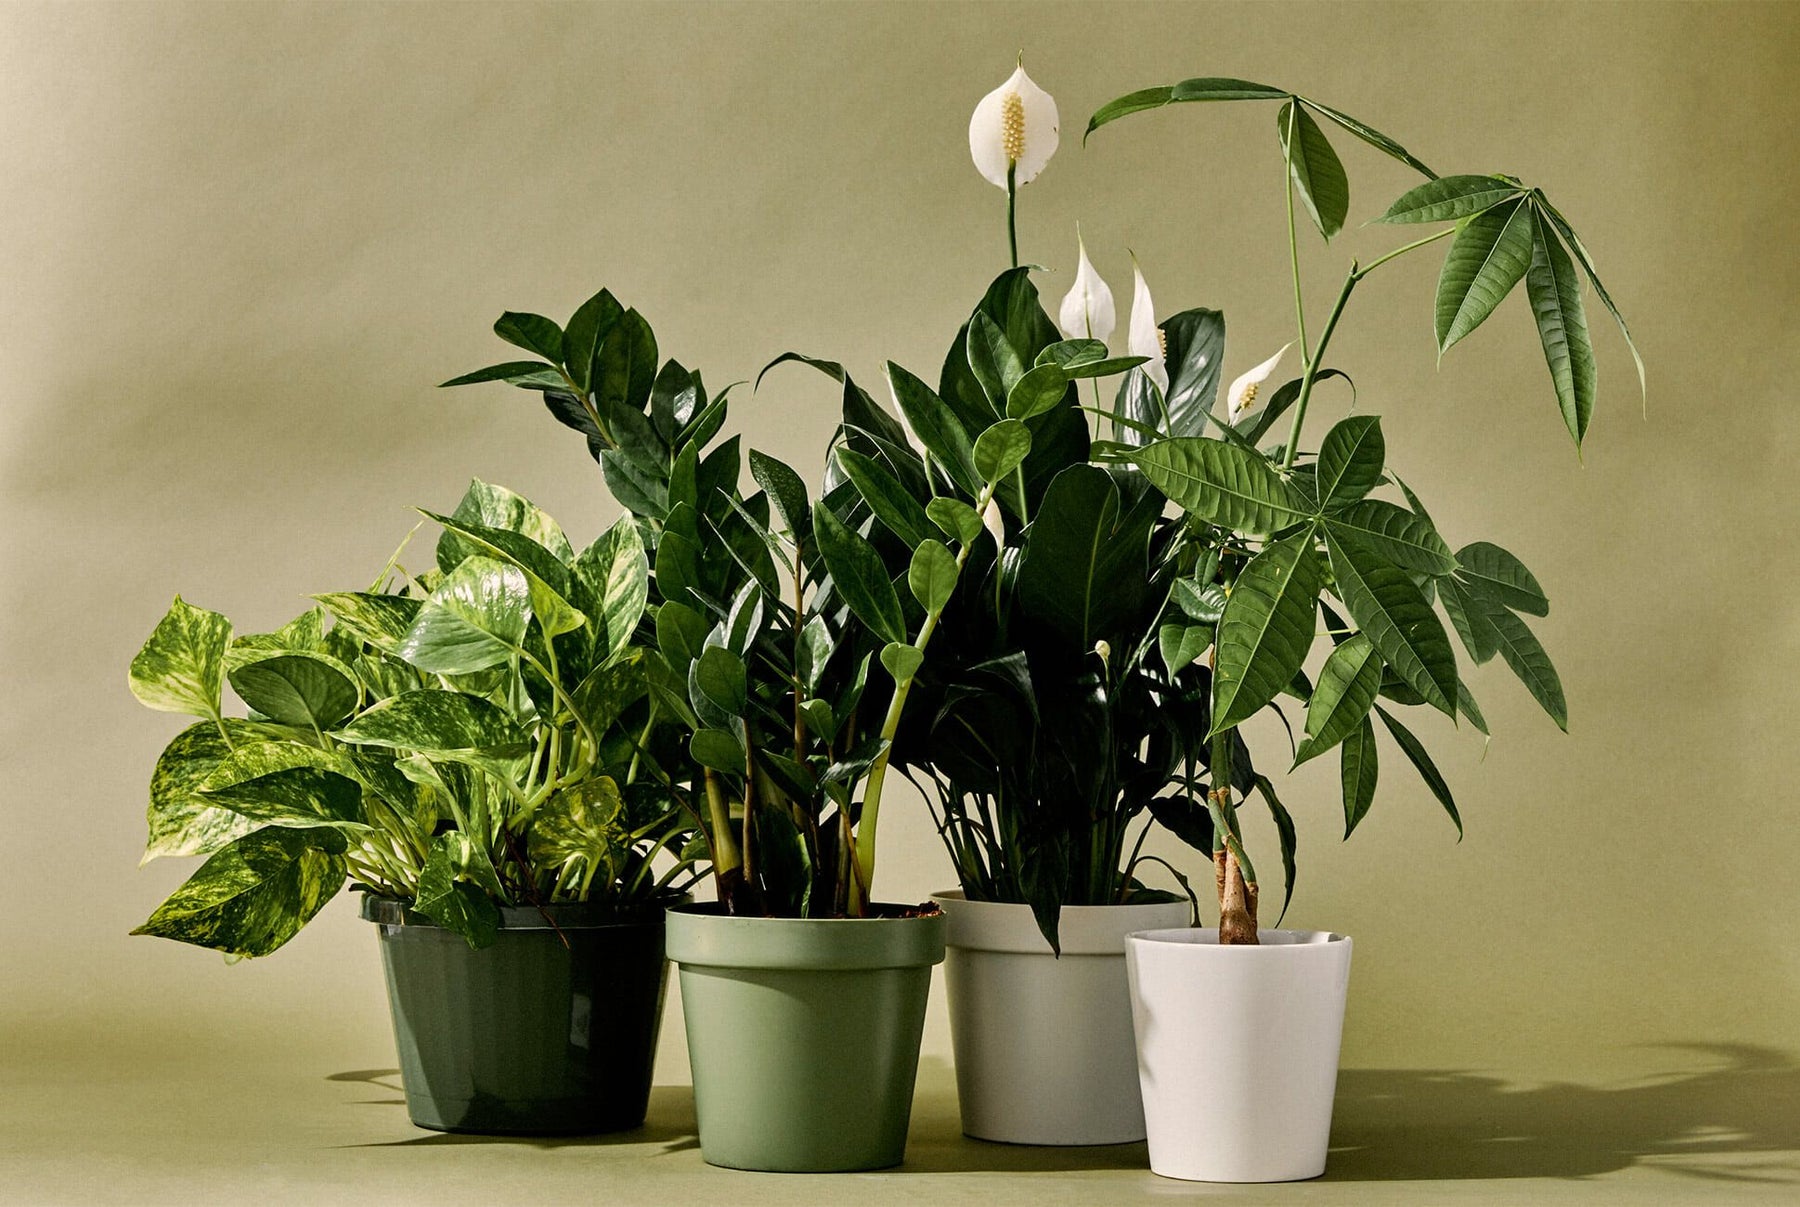 Top 10 Plants To Light Up Your Home